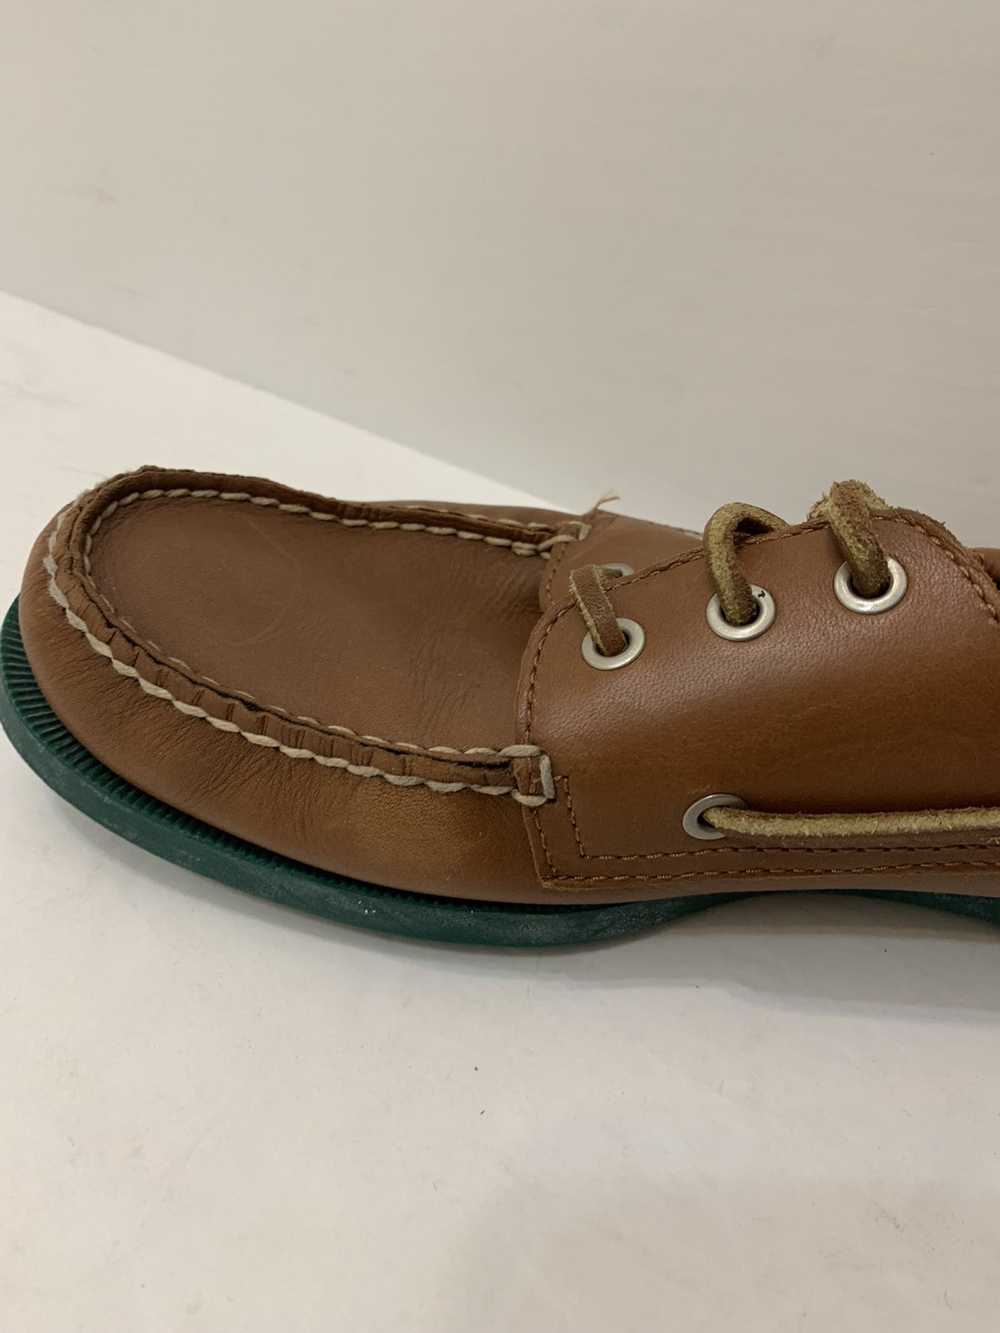 Sperry SPERRY TOP SIDER LEATHER BOAT SHOES - image 12